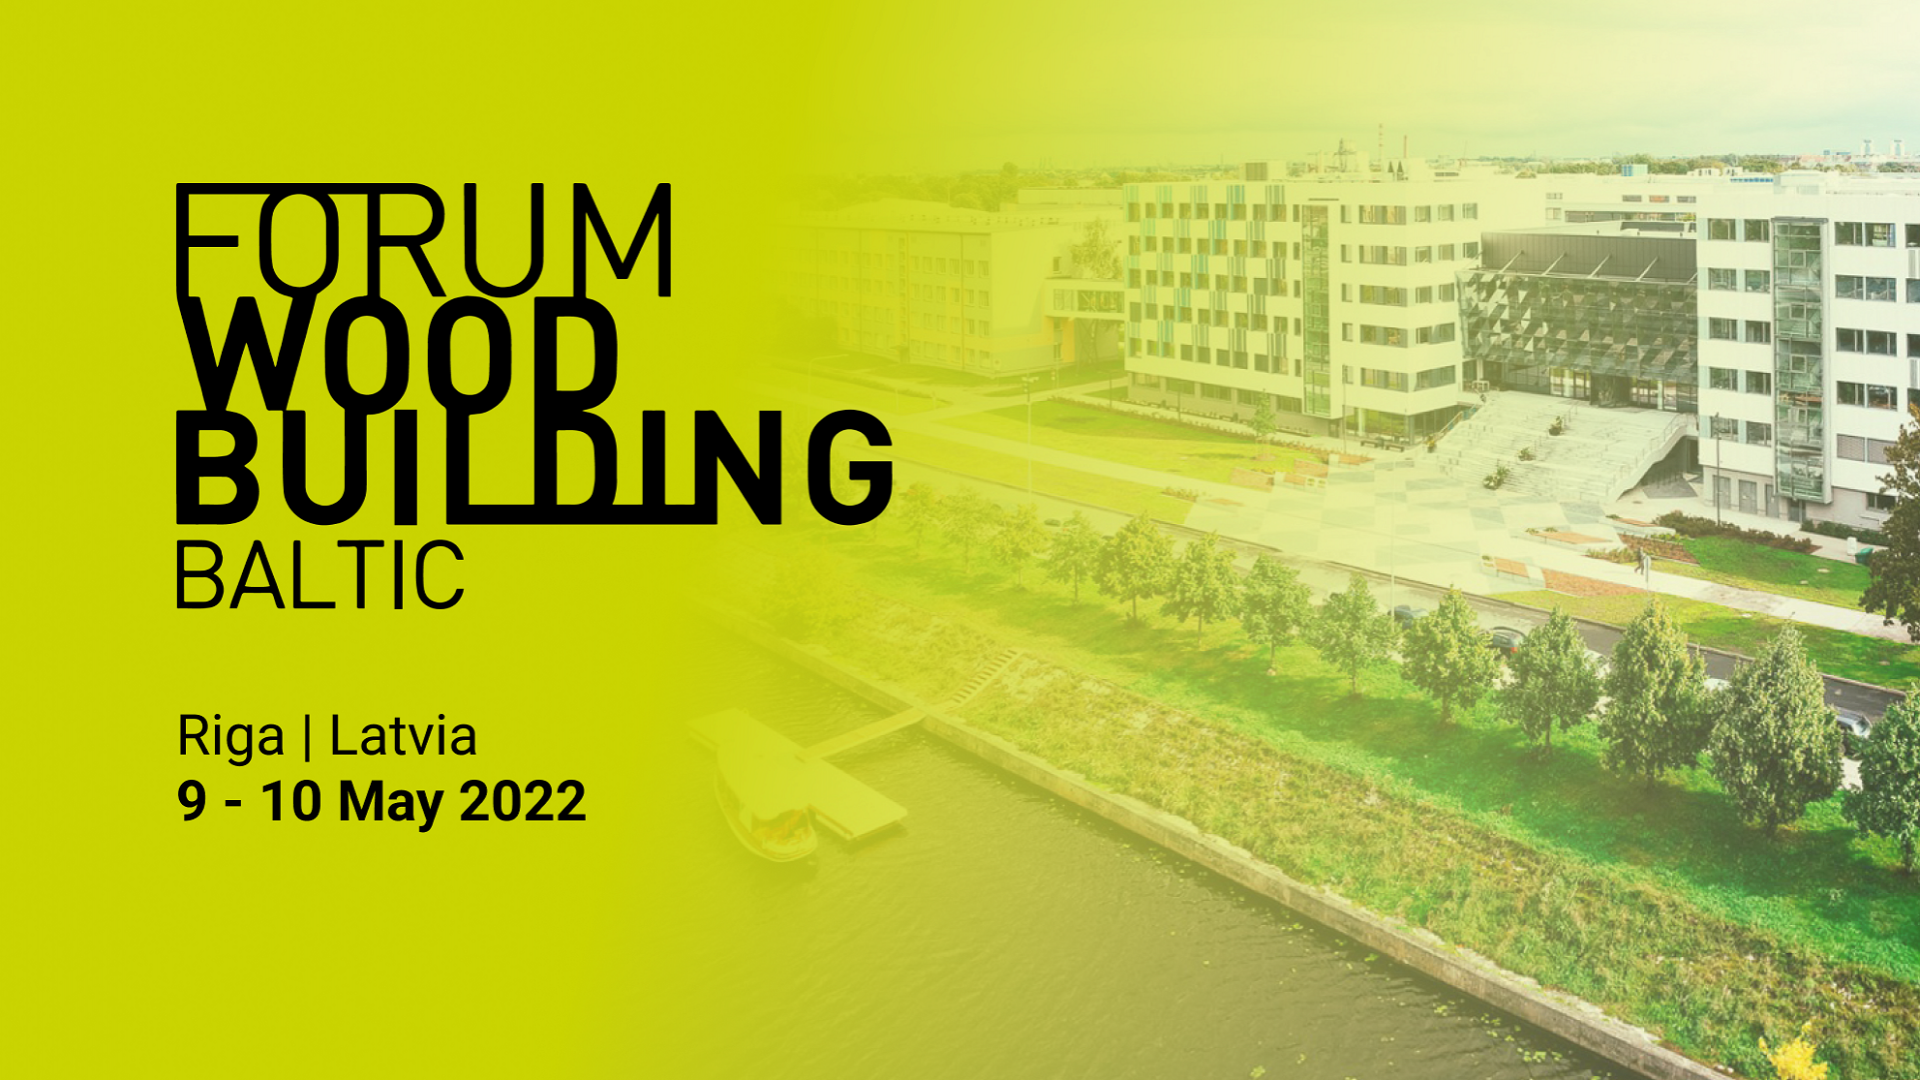 Registration for the 3rd Forum Wood Building Baltic 2022